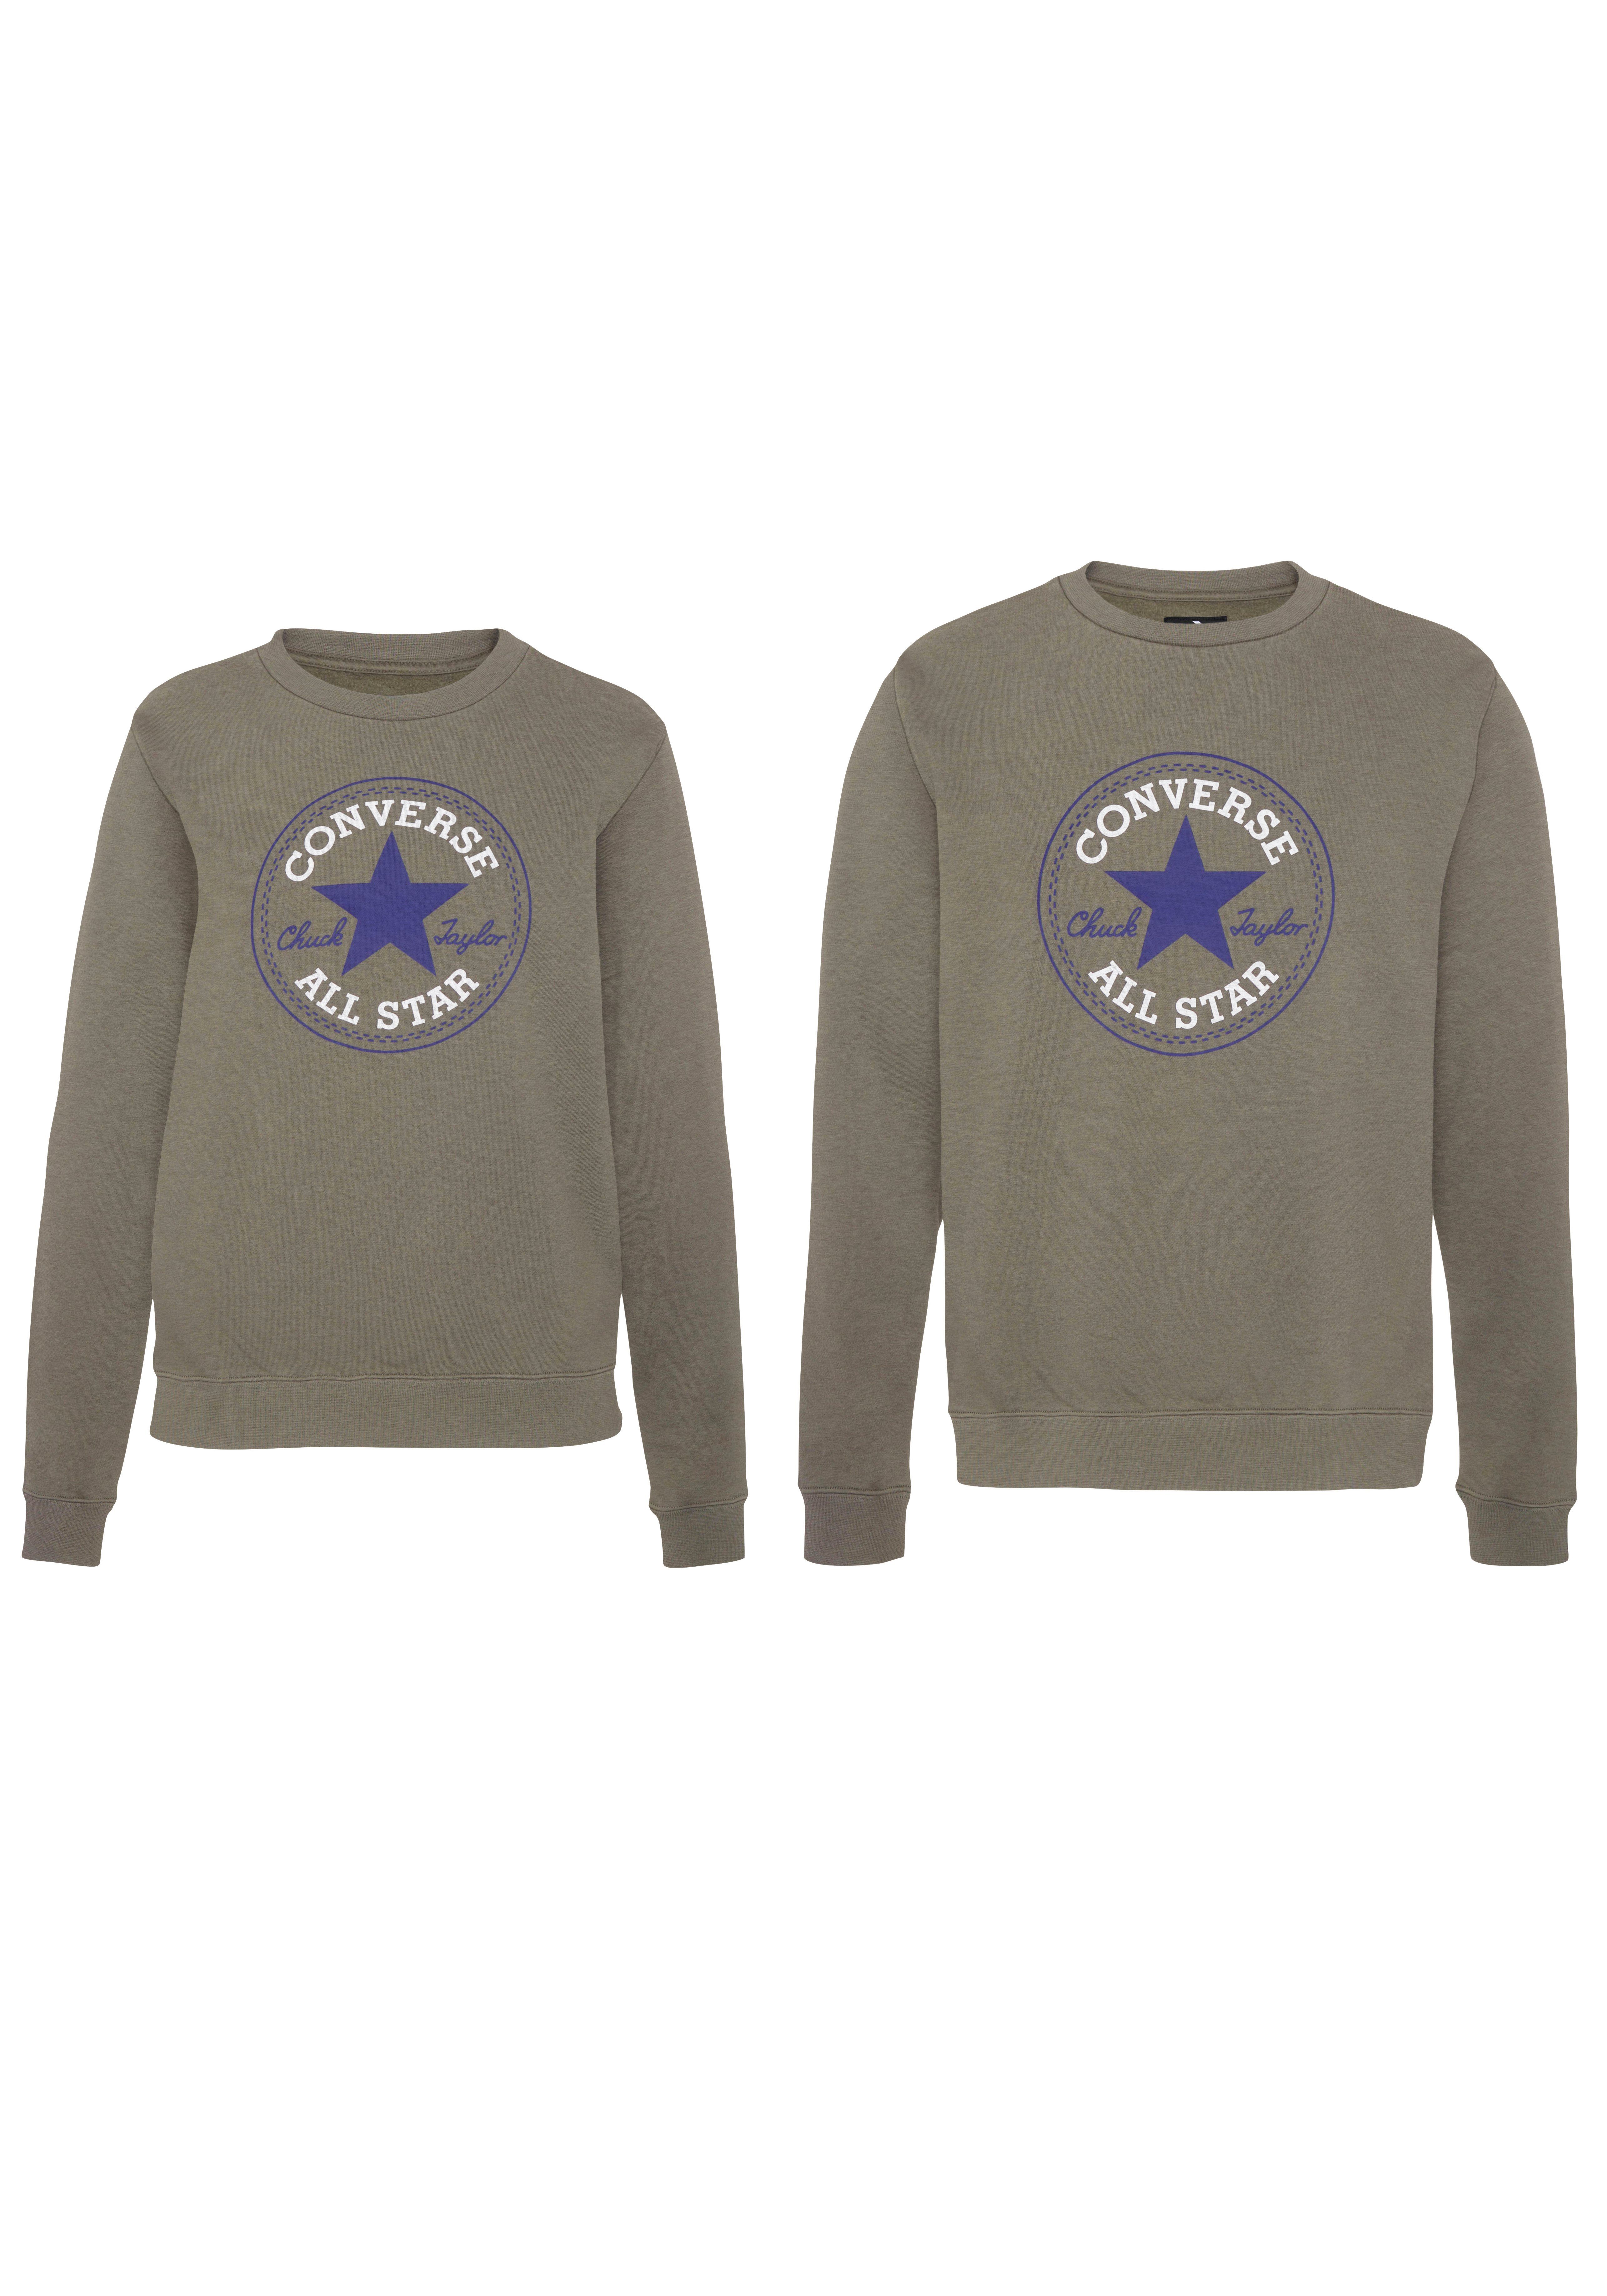 Converse Sweatshirt UNISEX ALL BRUSHED BACK STAR PATCH olive